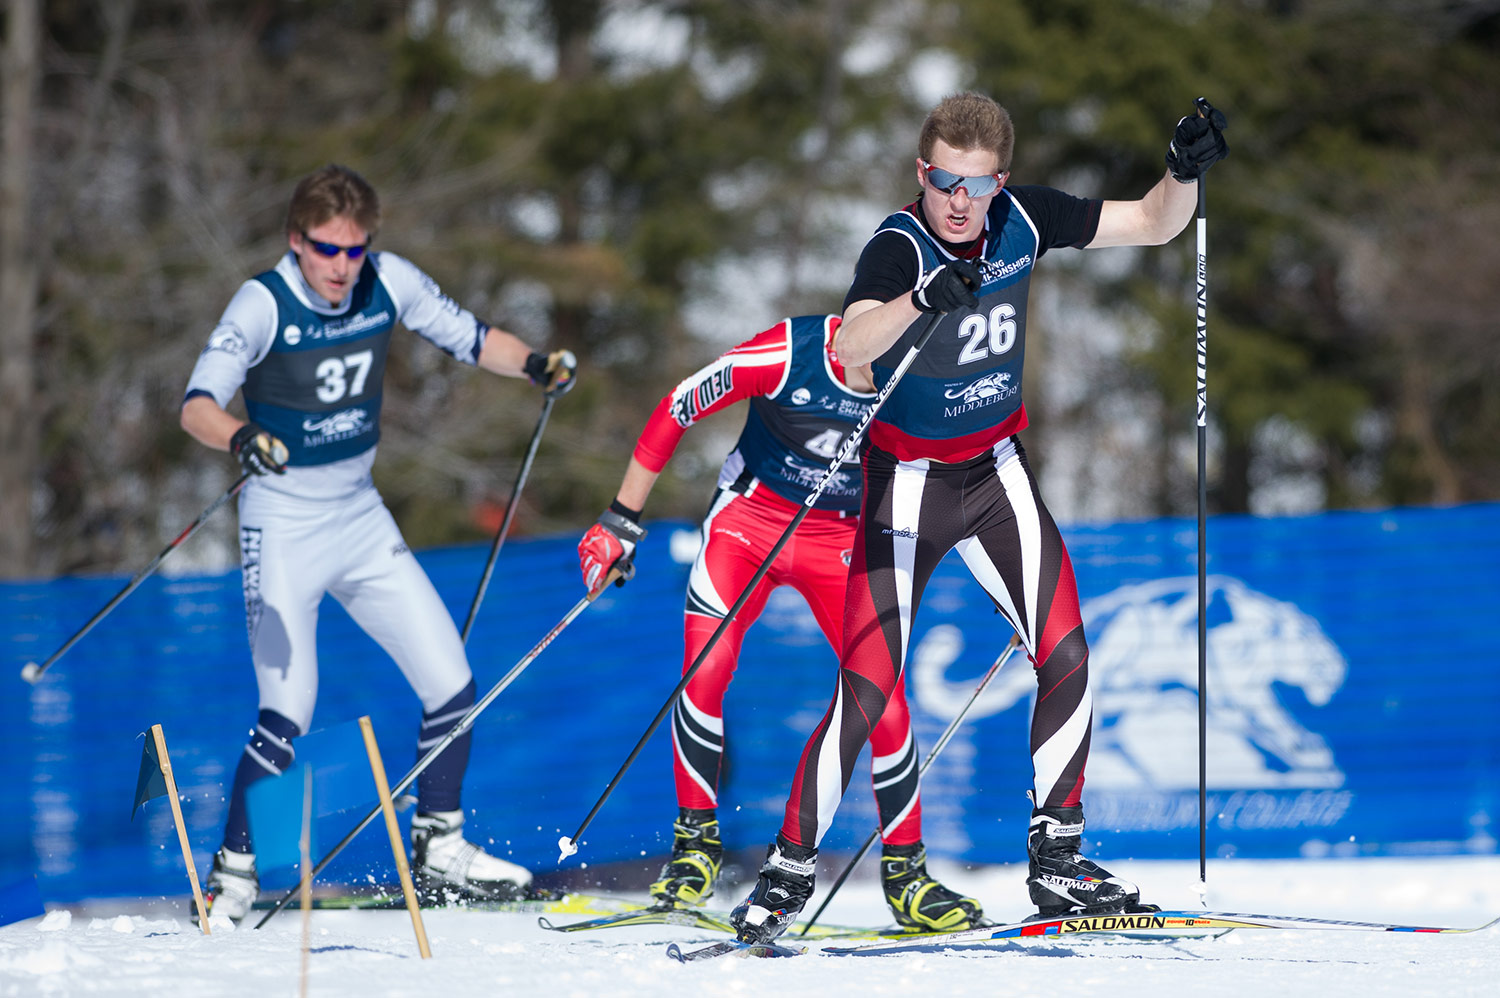 St. Lawrence, New Mexico, and UNH skiers gather together at the 2013 NCAA Championships. Credit: flyingpointroad.com